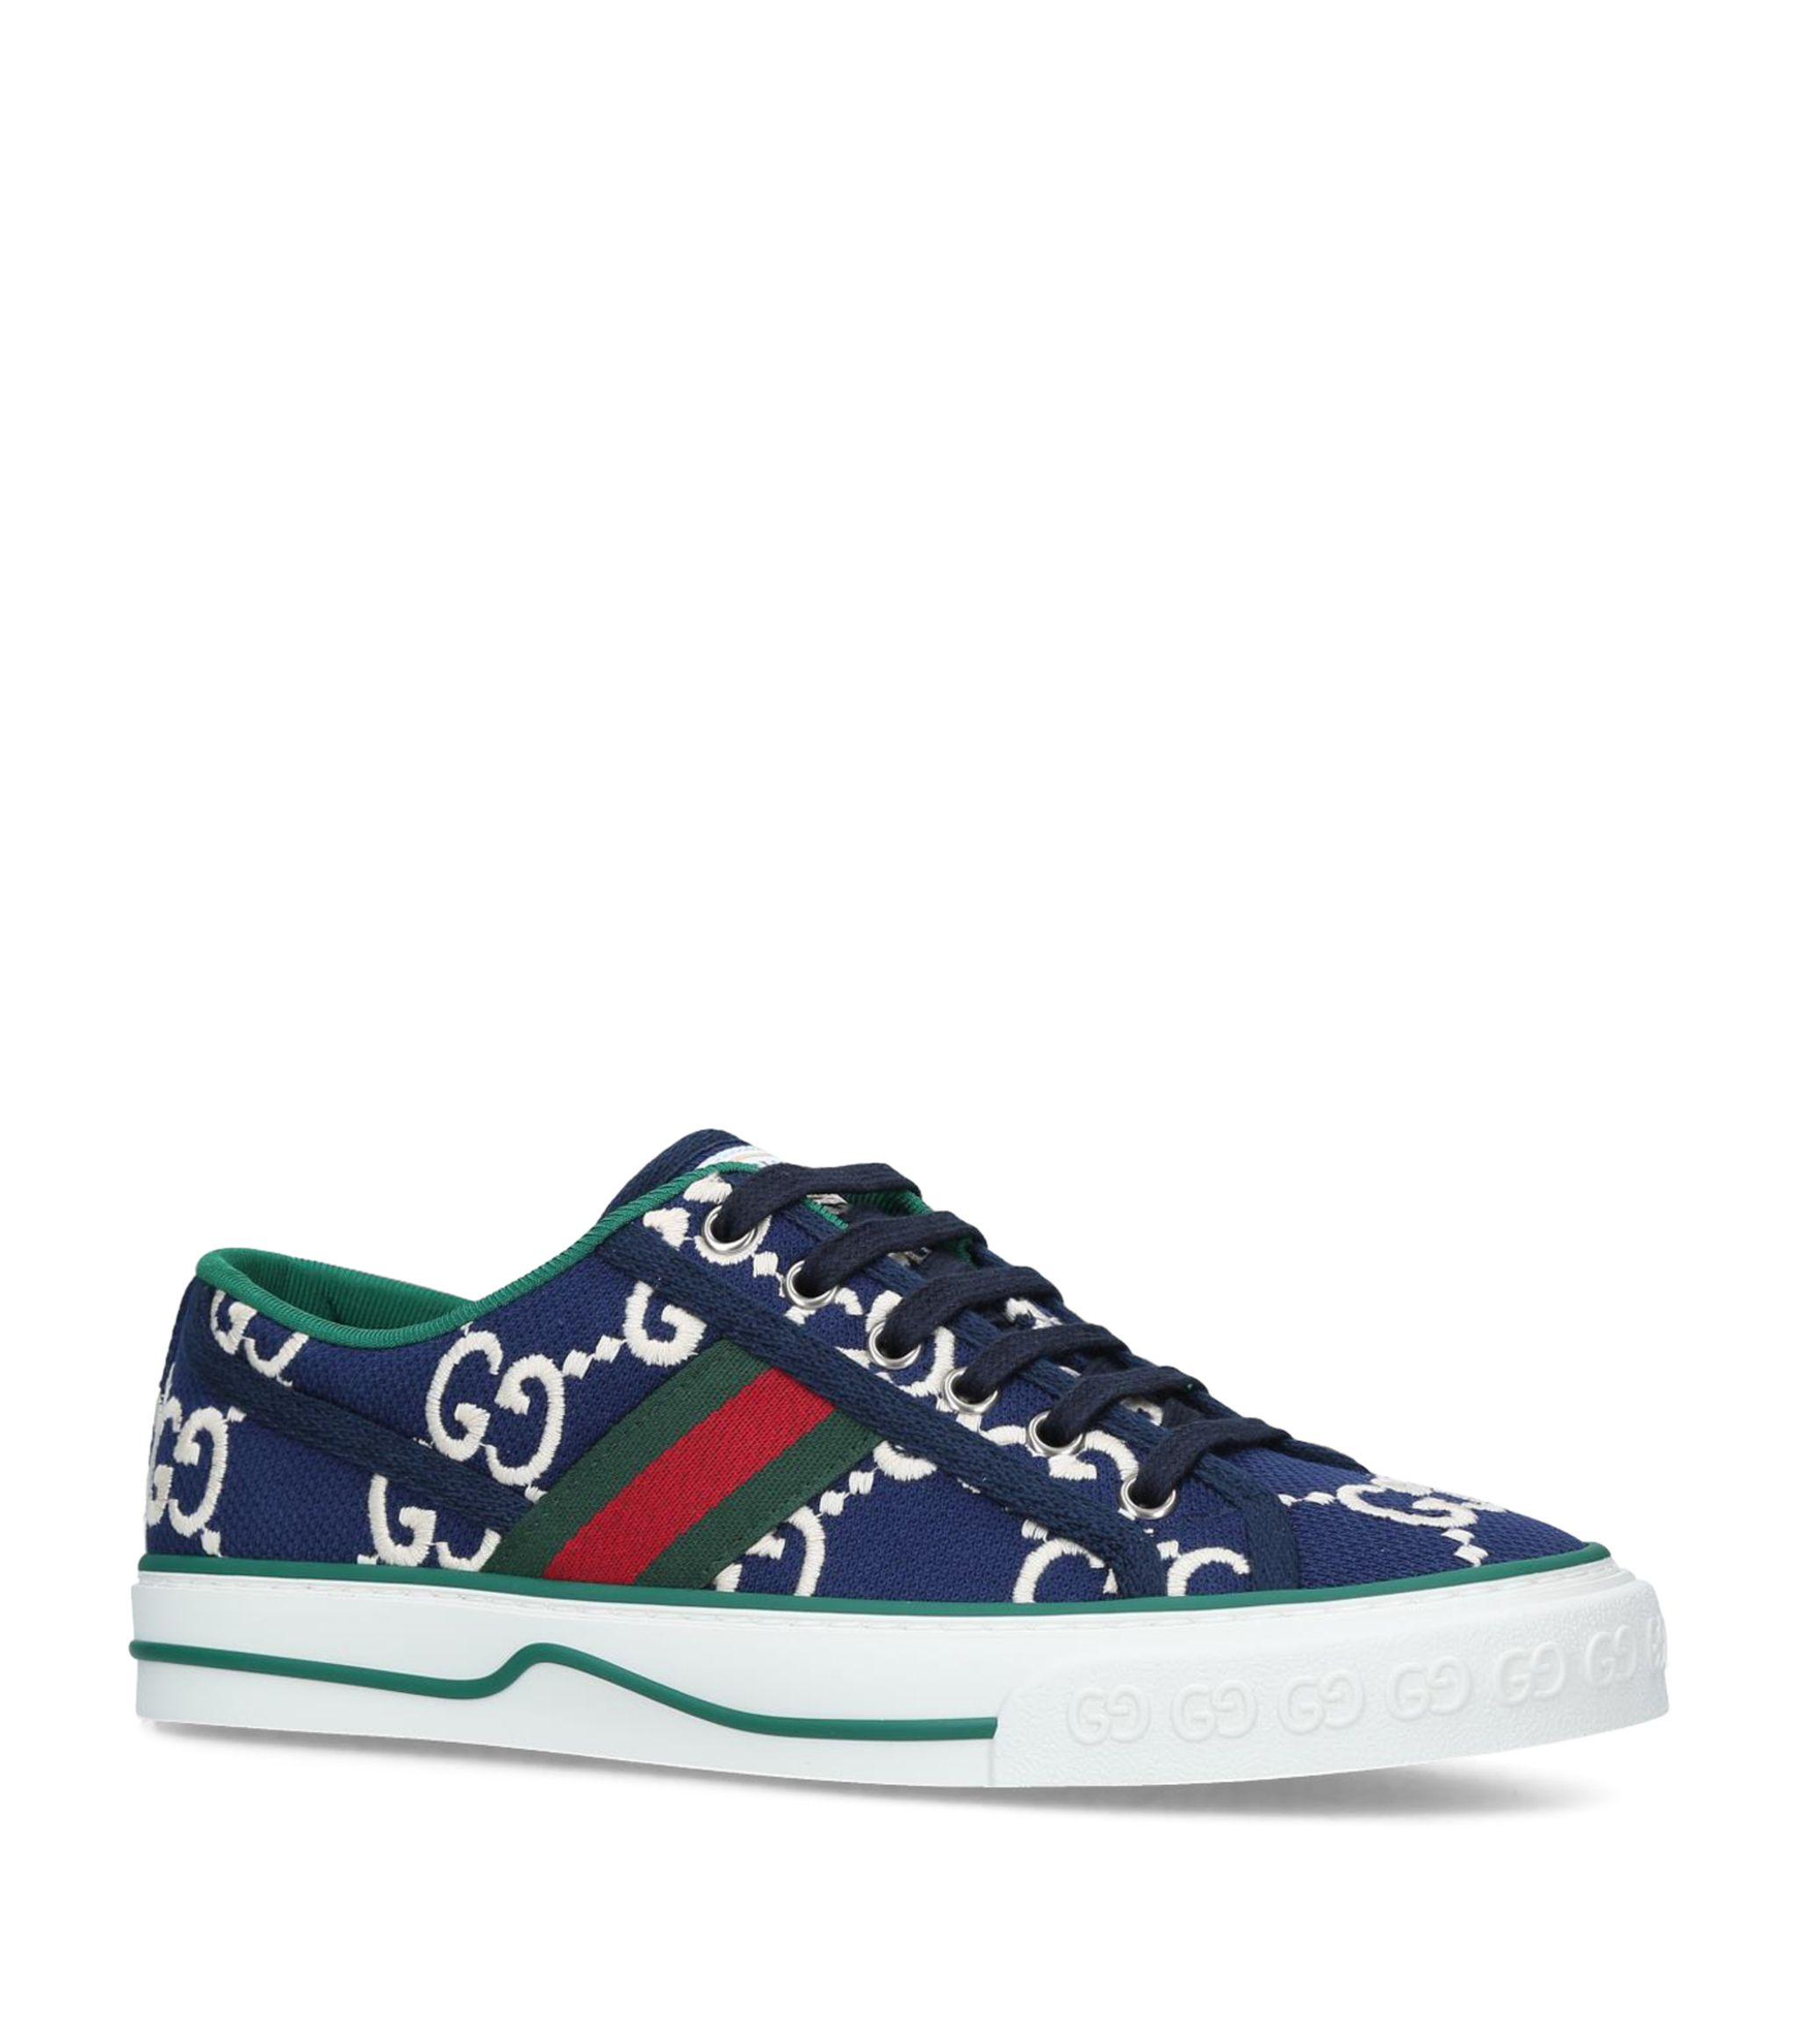 Gucci Canvas Vulcan Sneakers in Blue - Lyst